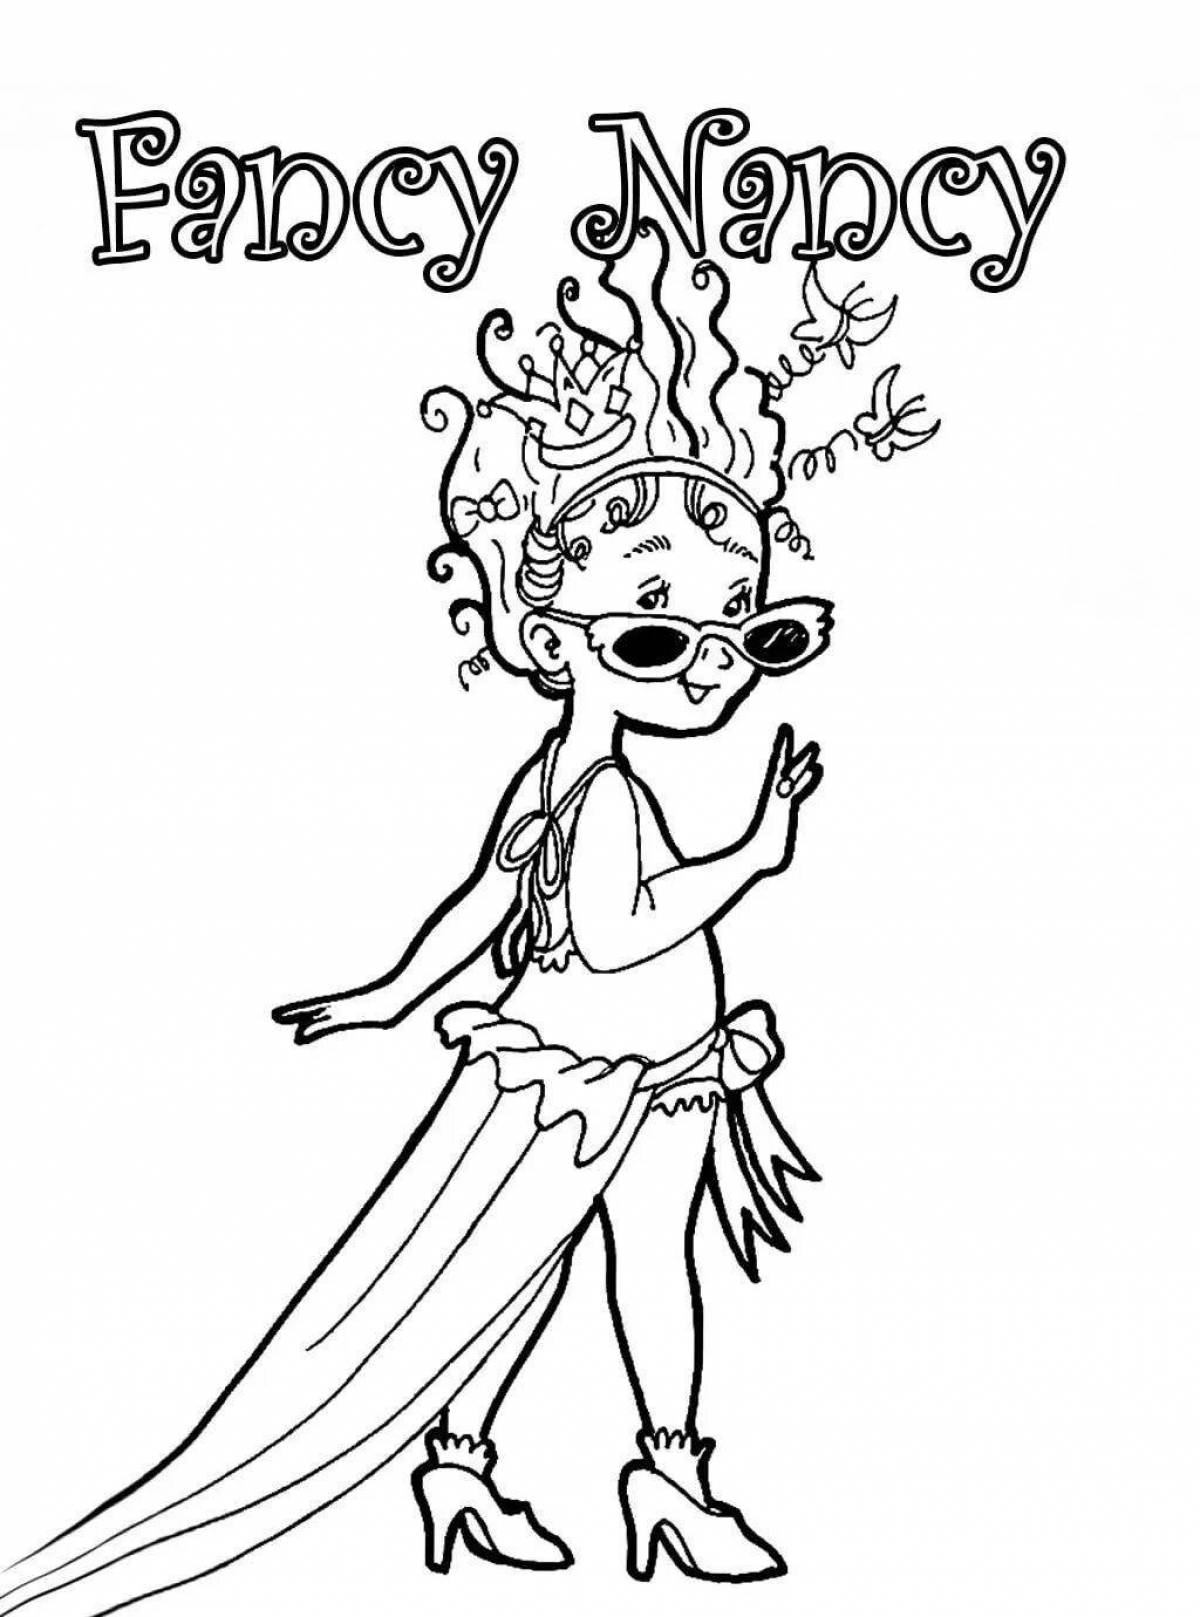 Coloring page inviting wonderful day